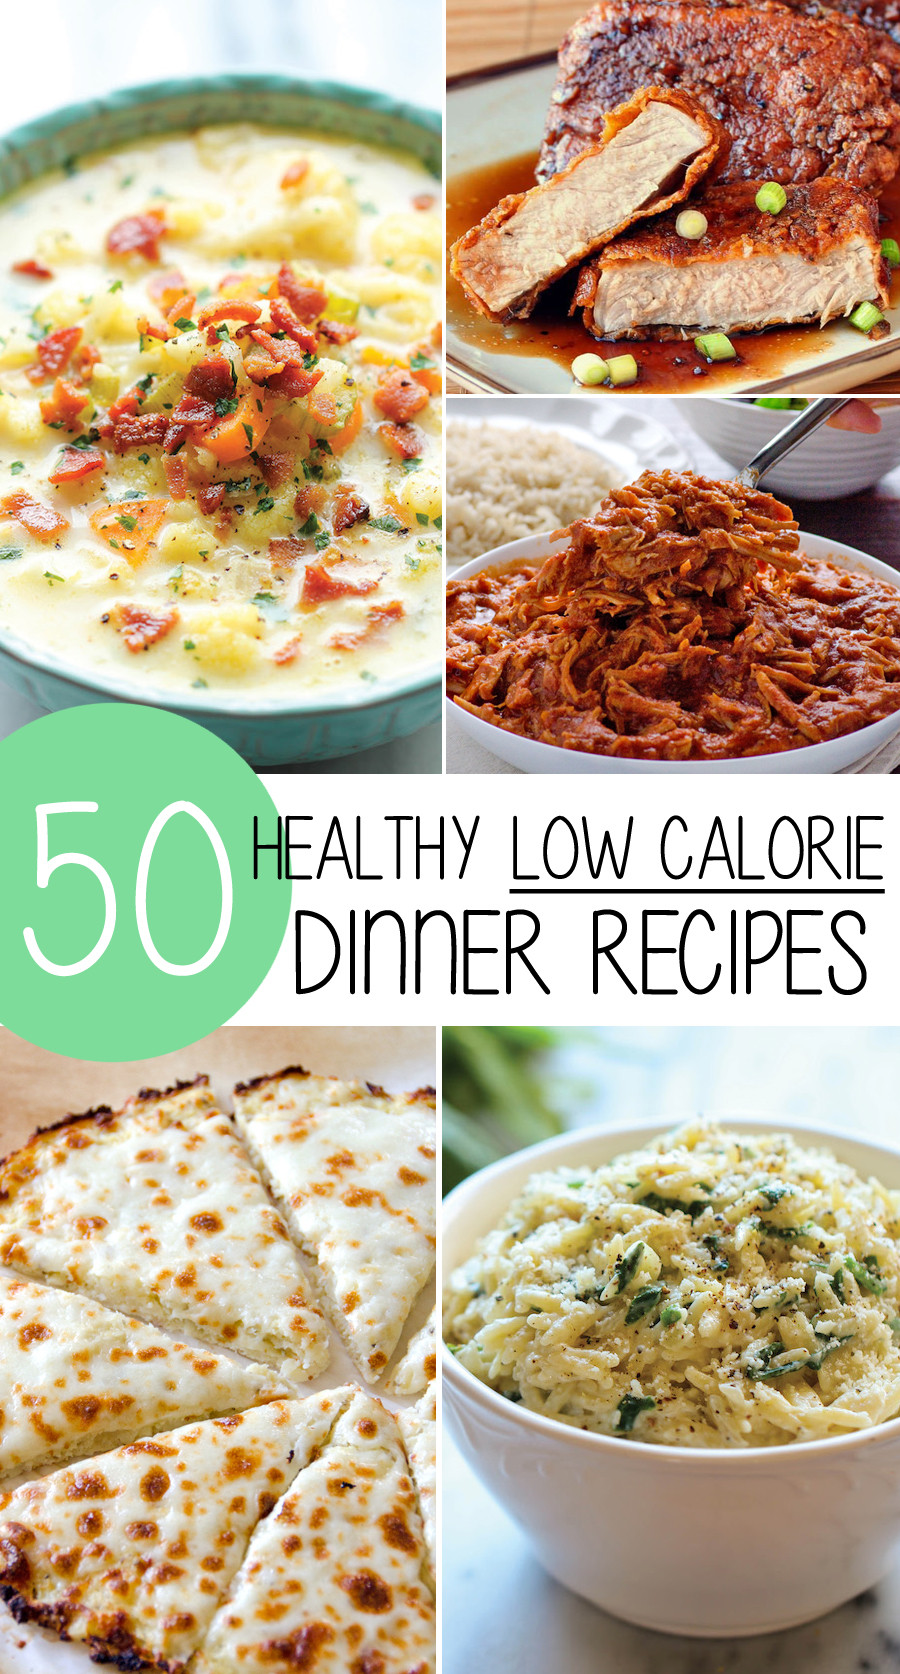 Best Low Calorie Dinners
 50 Healthy Low Calorie Weight Loss Dinner Recipes